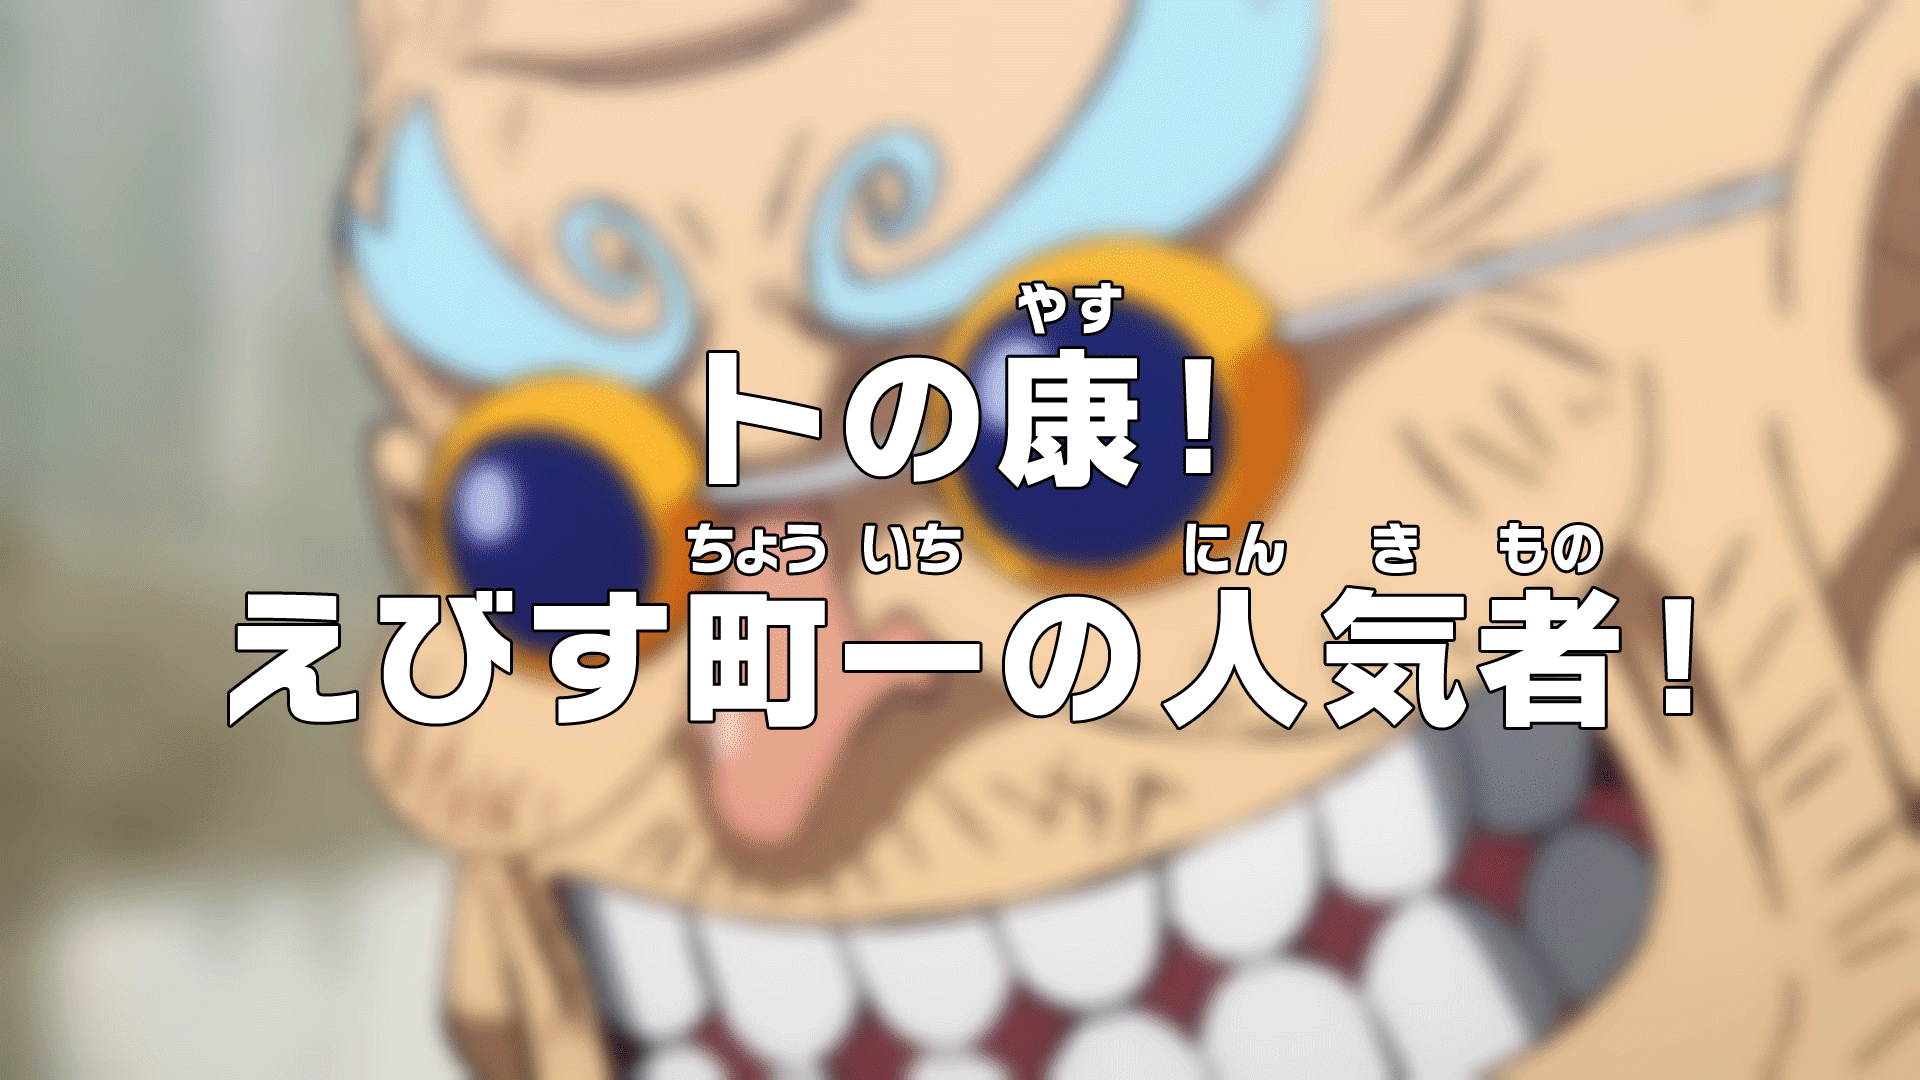 One Piece' Reveals 1047th Anime Episode Teaser